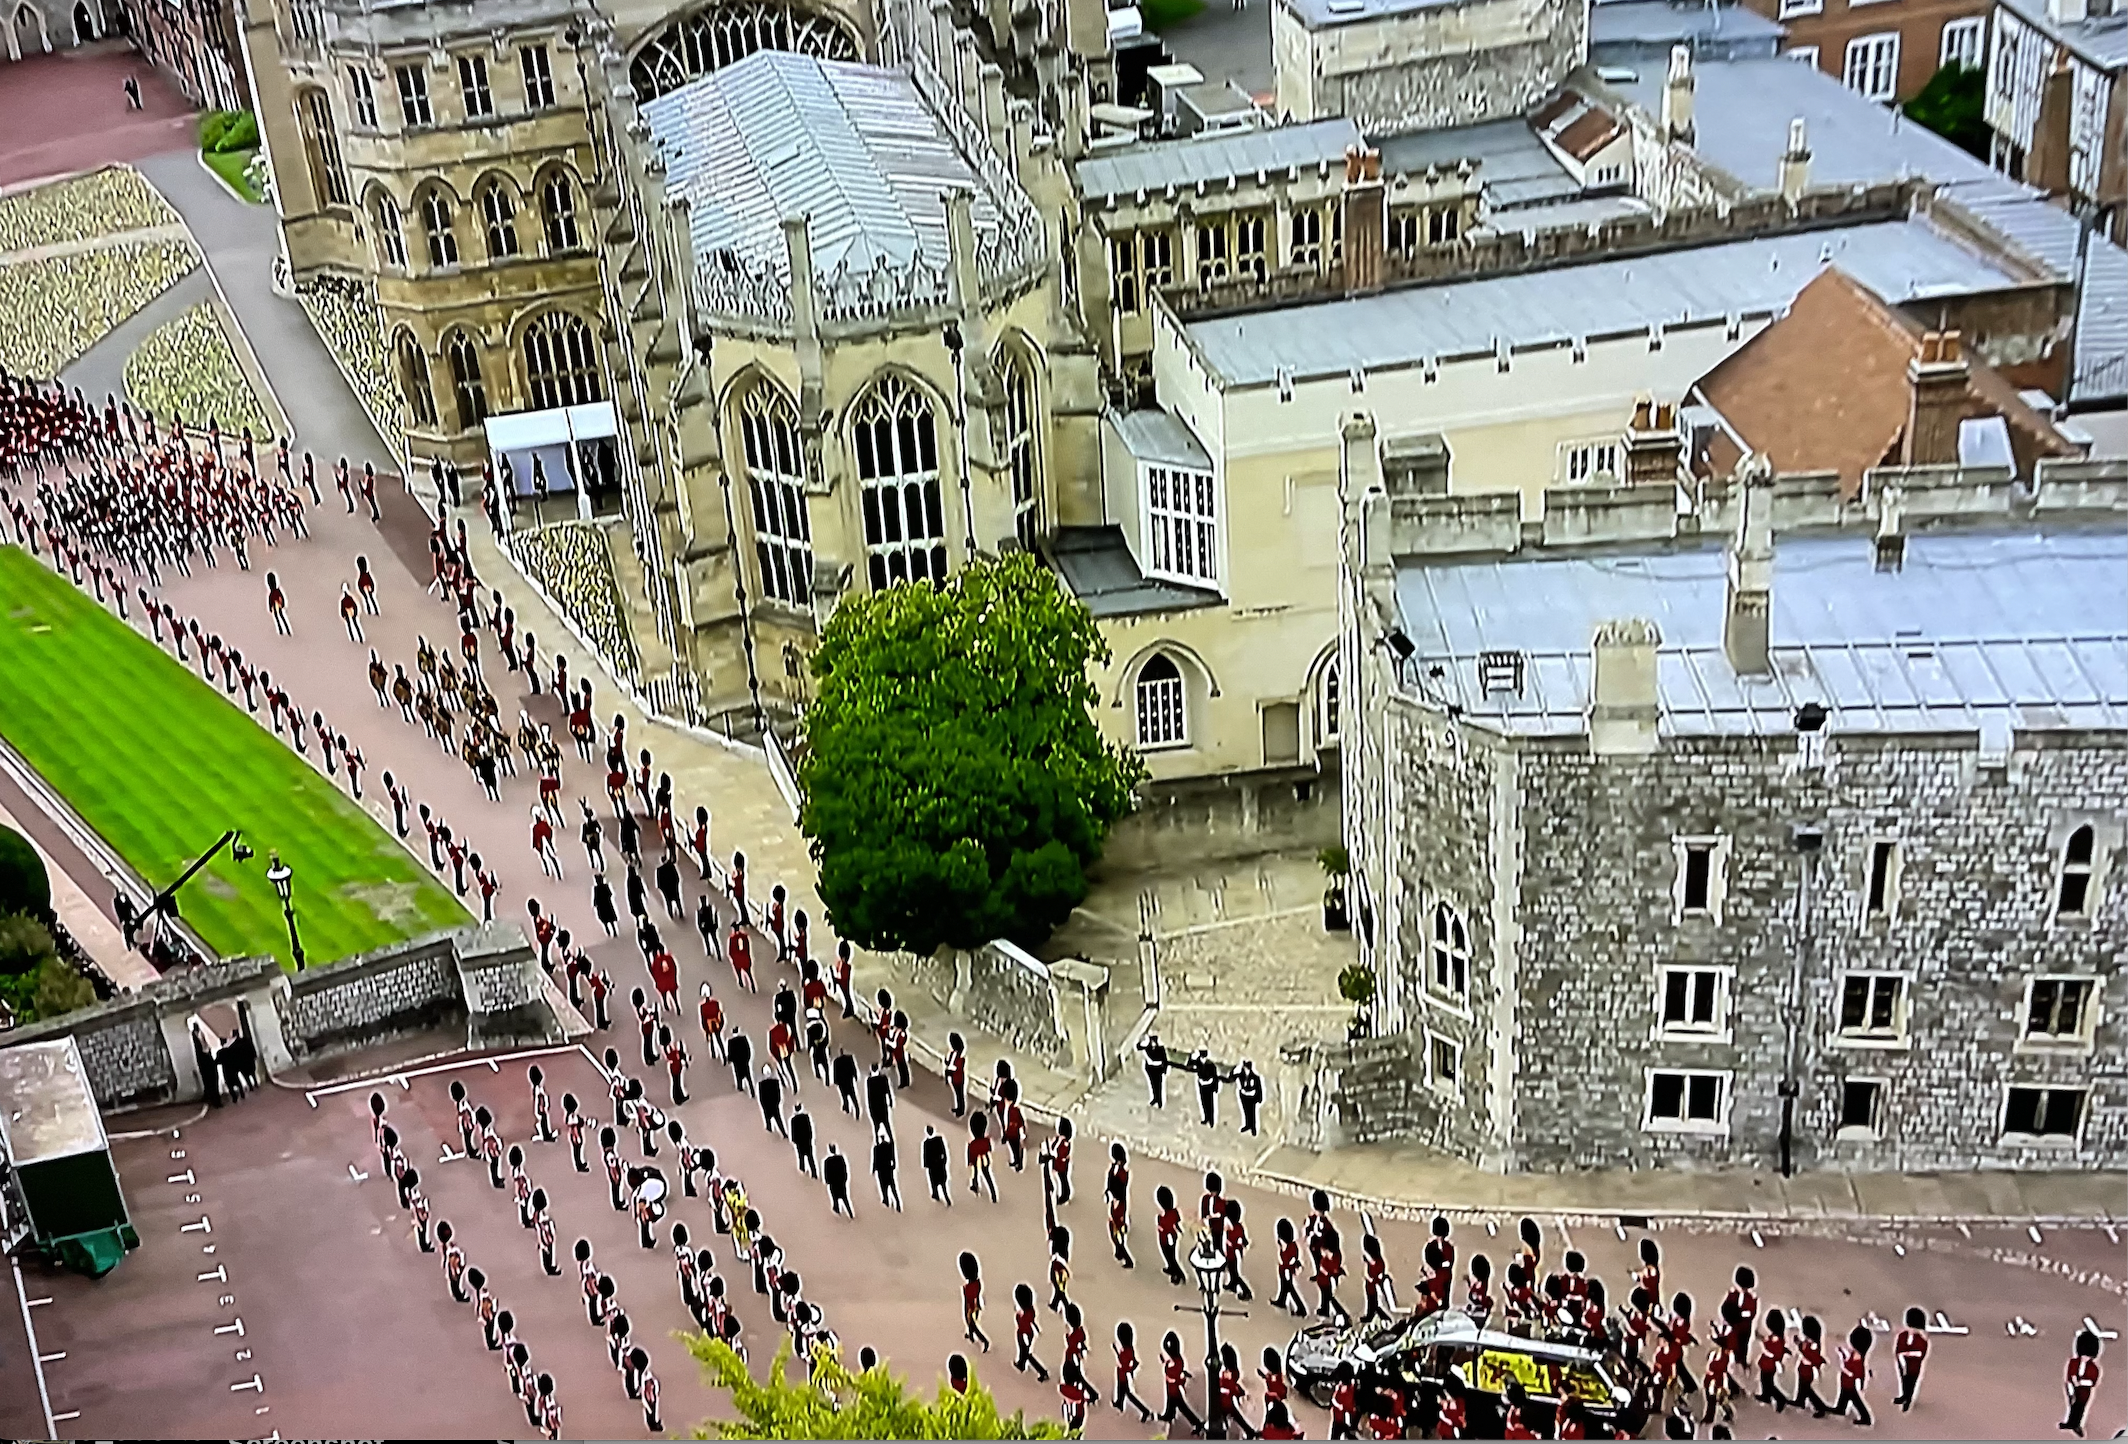 Queen's coffin procession inside Windsor Castle